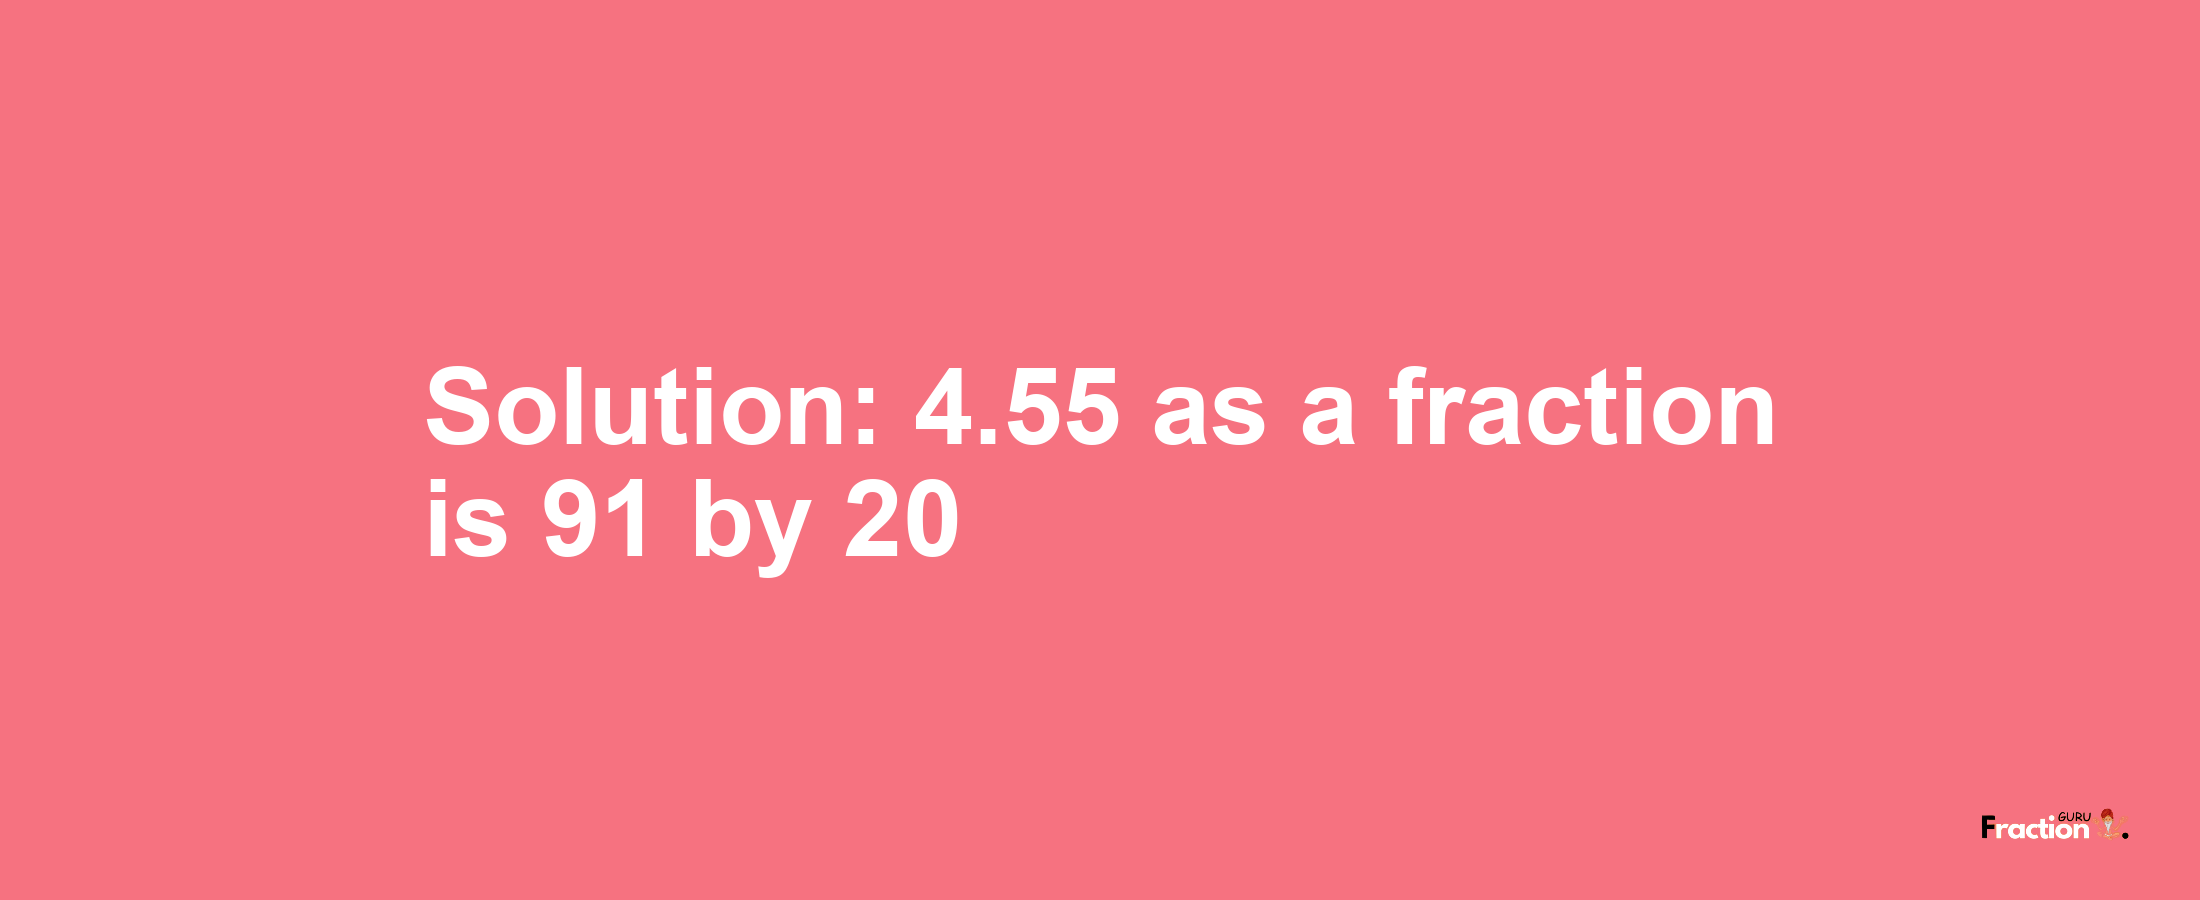 Solution:4.55 as a fraction is 91/20